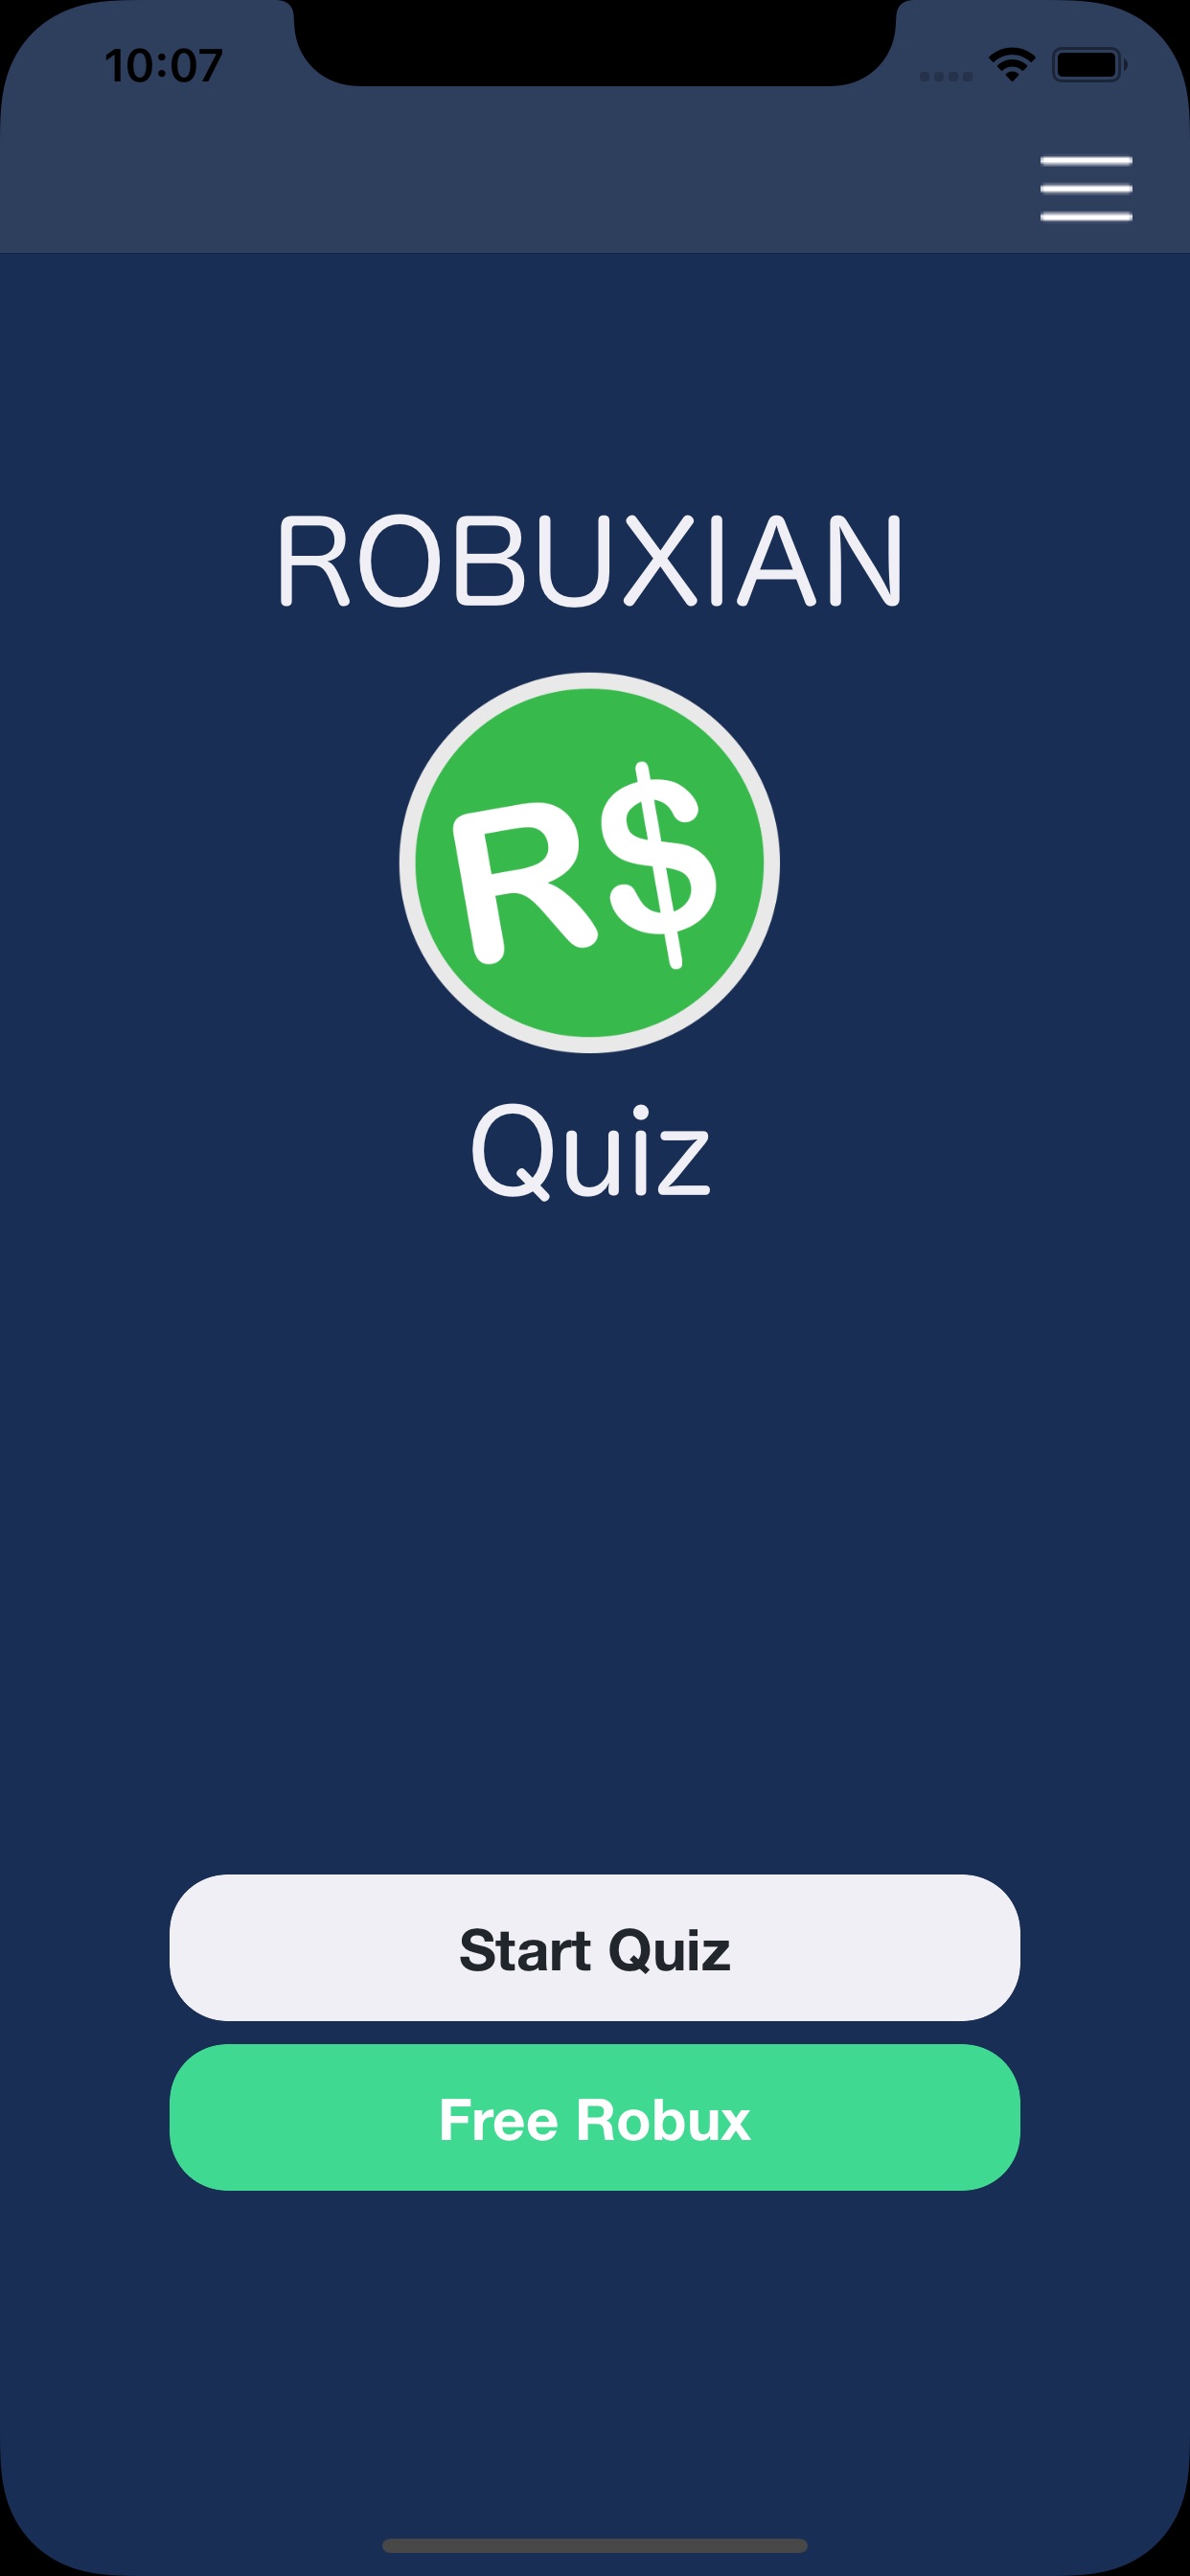 Robuxian Quiz For Robux App Store Review Aso Revenue Downloads Appfollow - quiz for robux app store review aso revenue